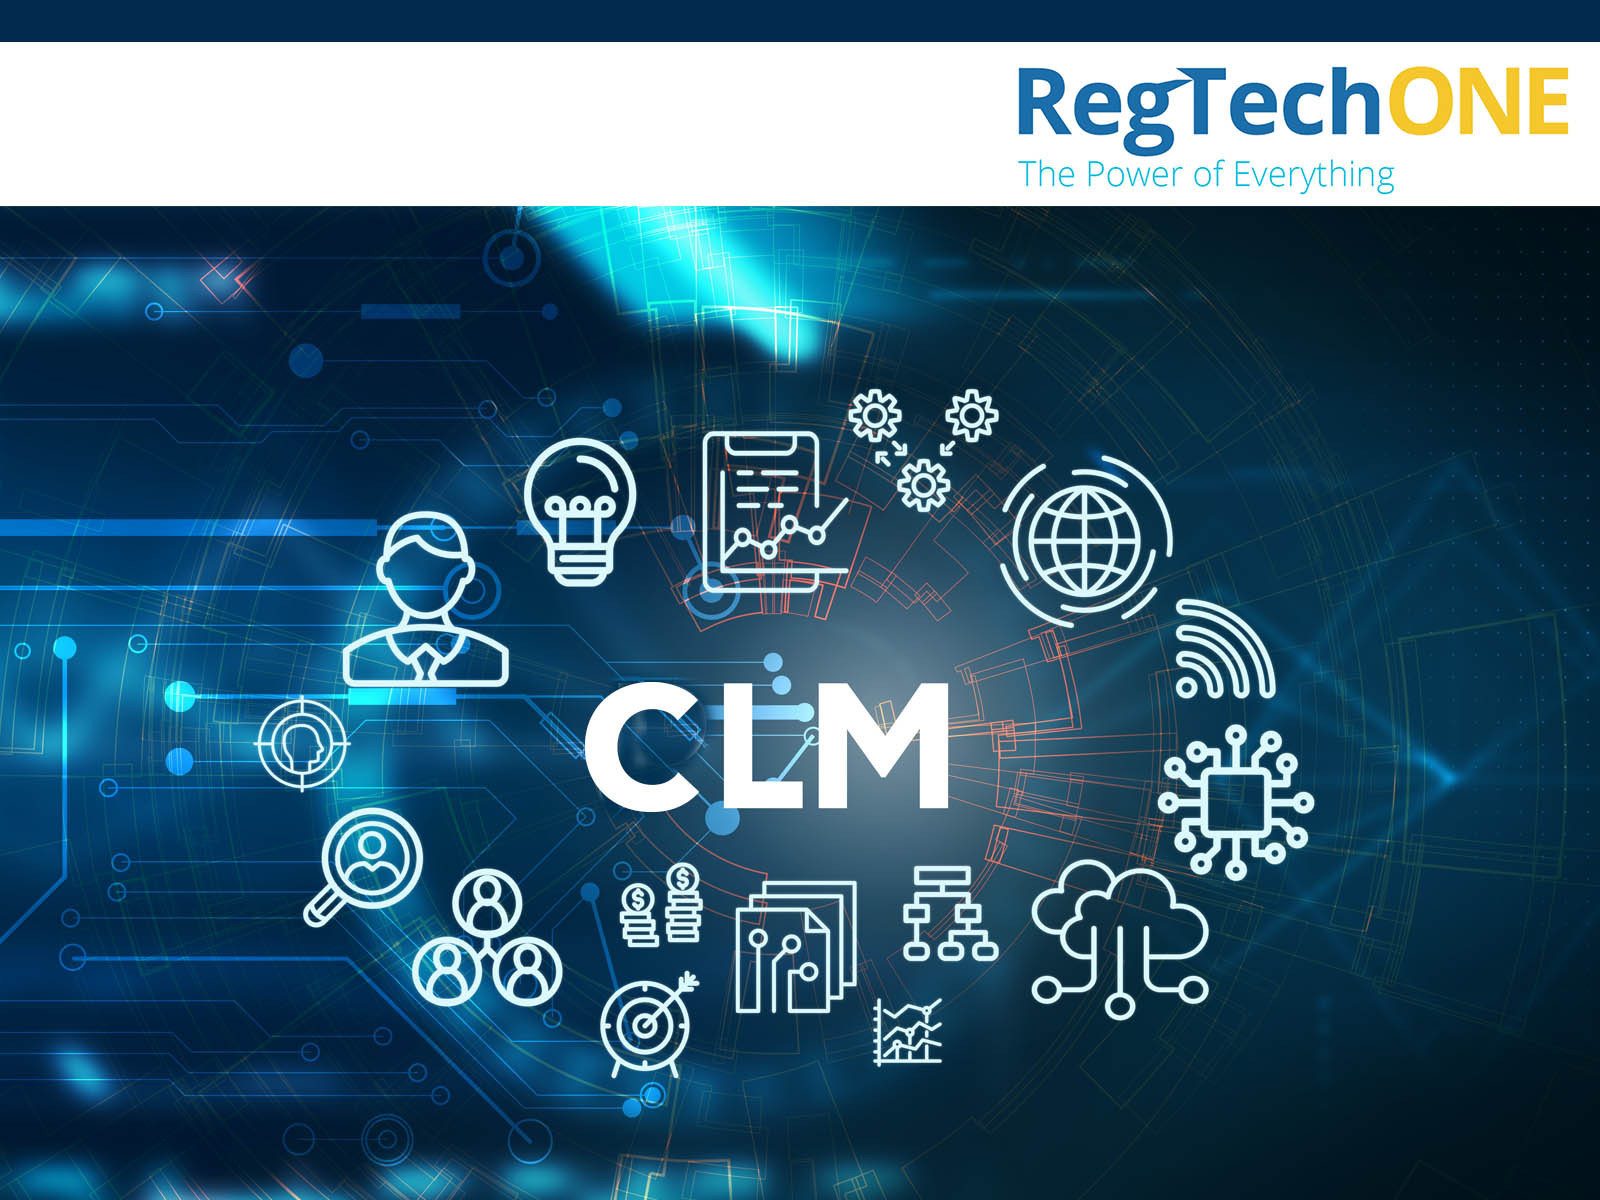 Graphic illustration showing icons for Client Lifecycle Management on the RegTechONE platform, which offers KYC software, AML software, CLM software, and much more.